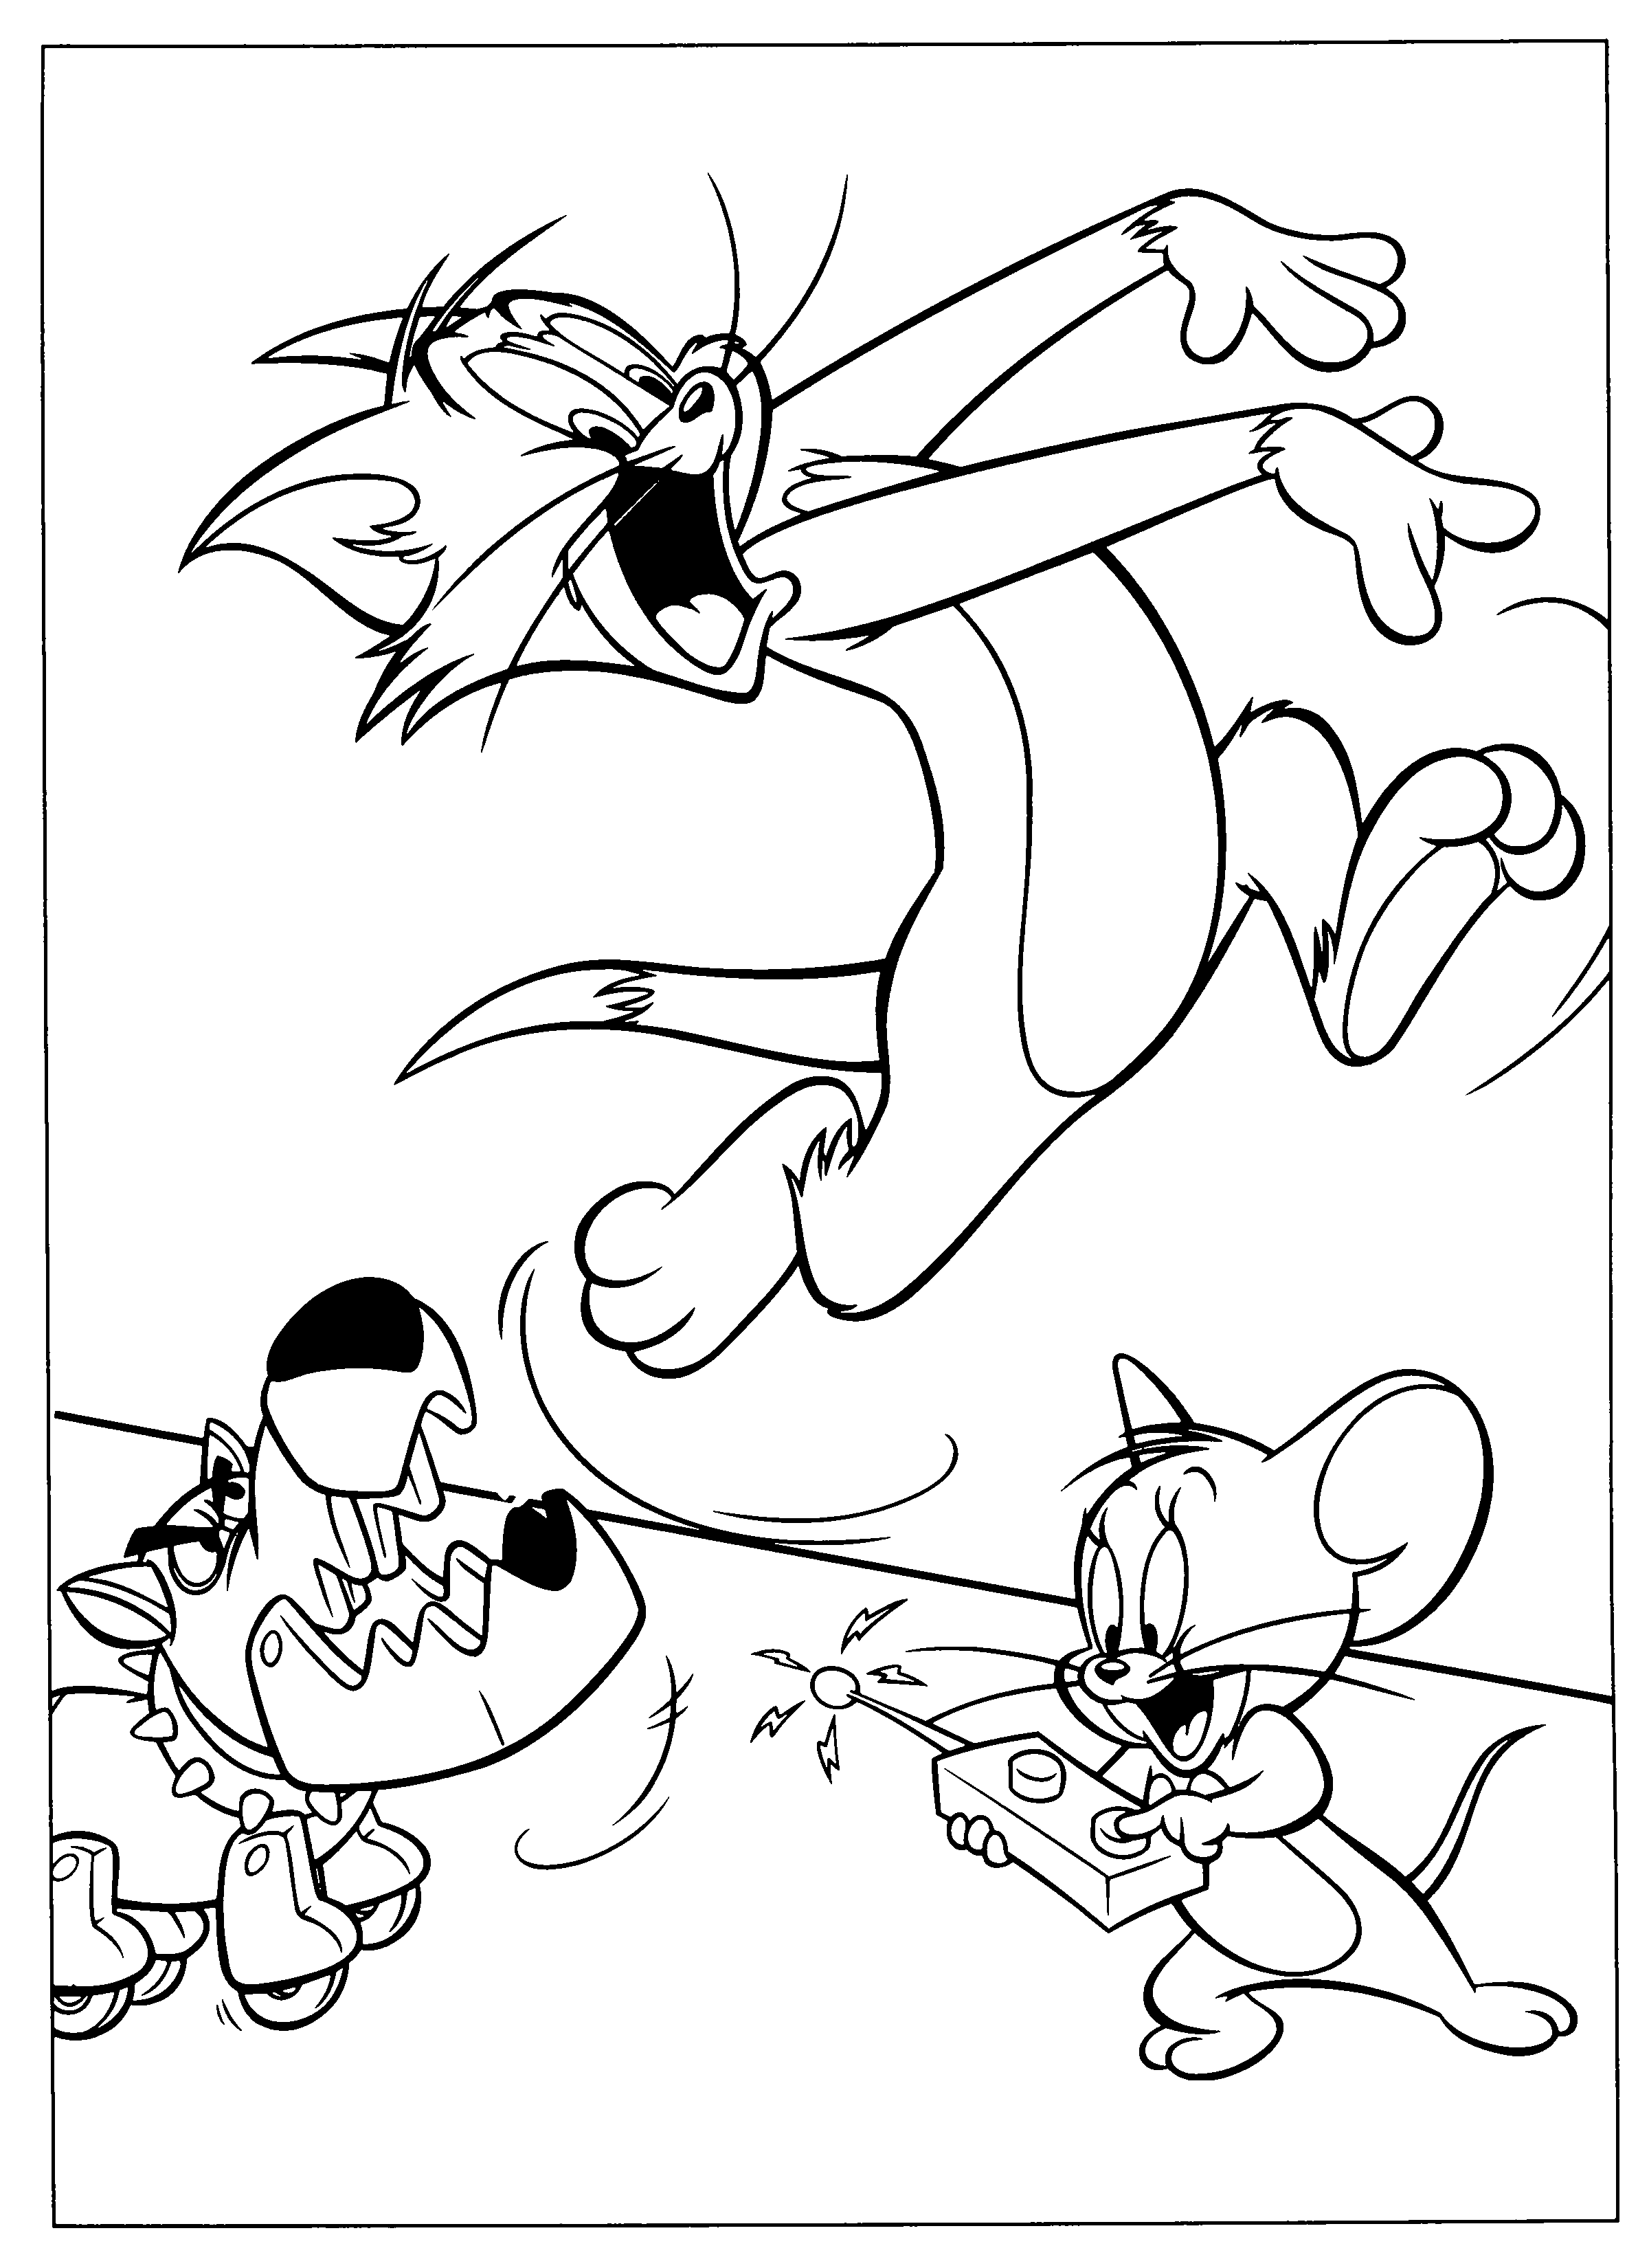 Free Tom and Jerry coloring page - SheetalColor.com